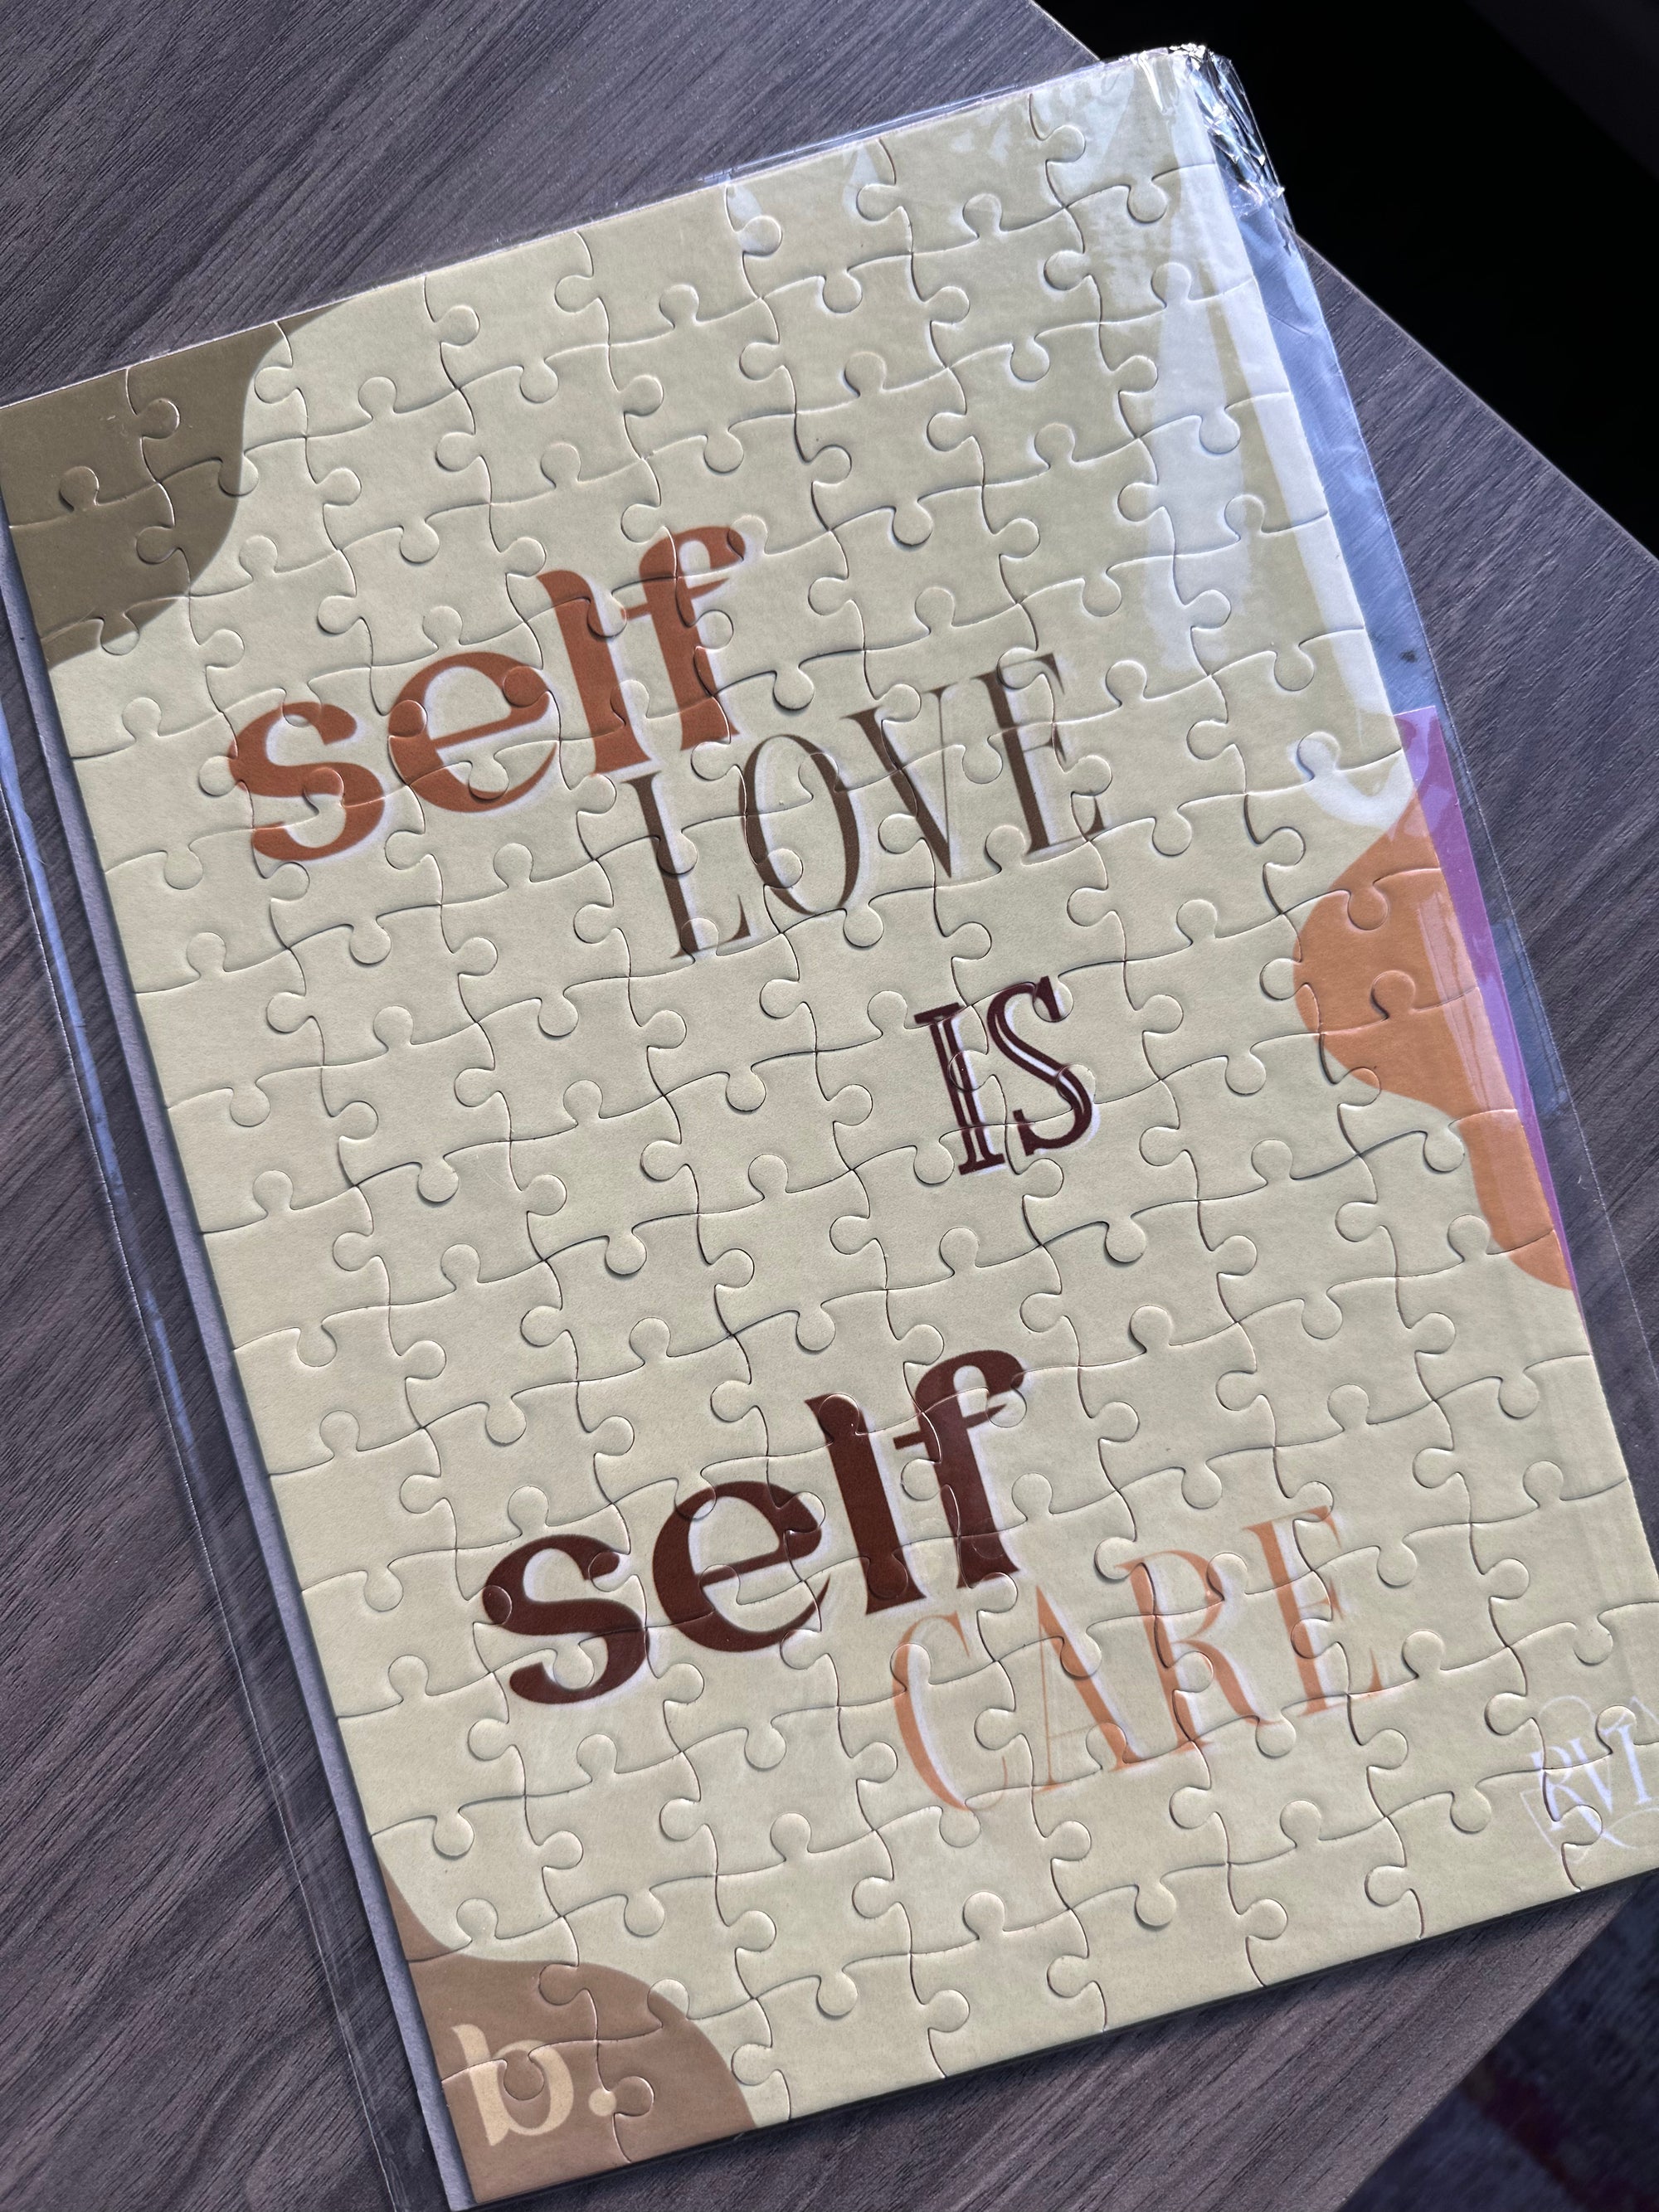 rvl wellness x blended self-love puzzle